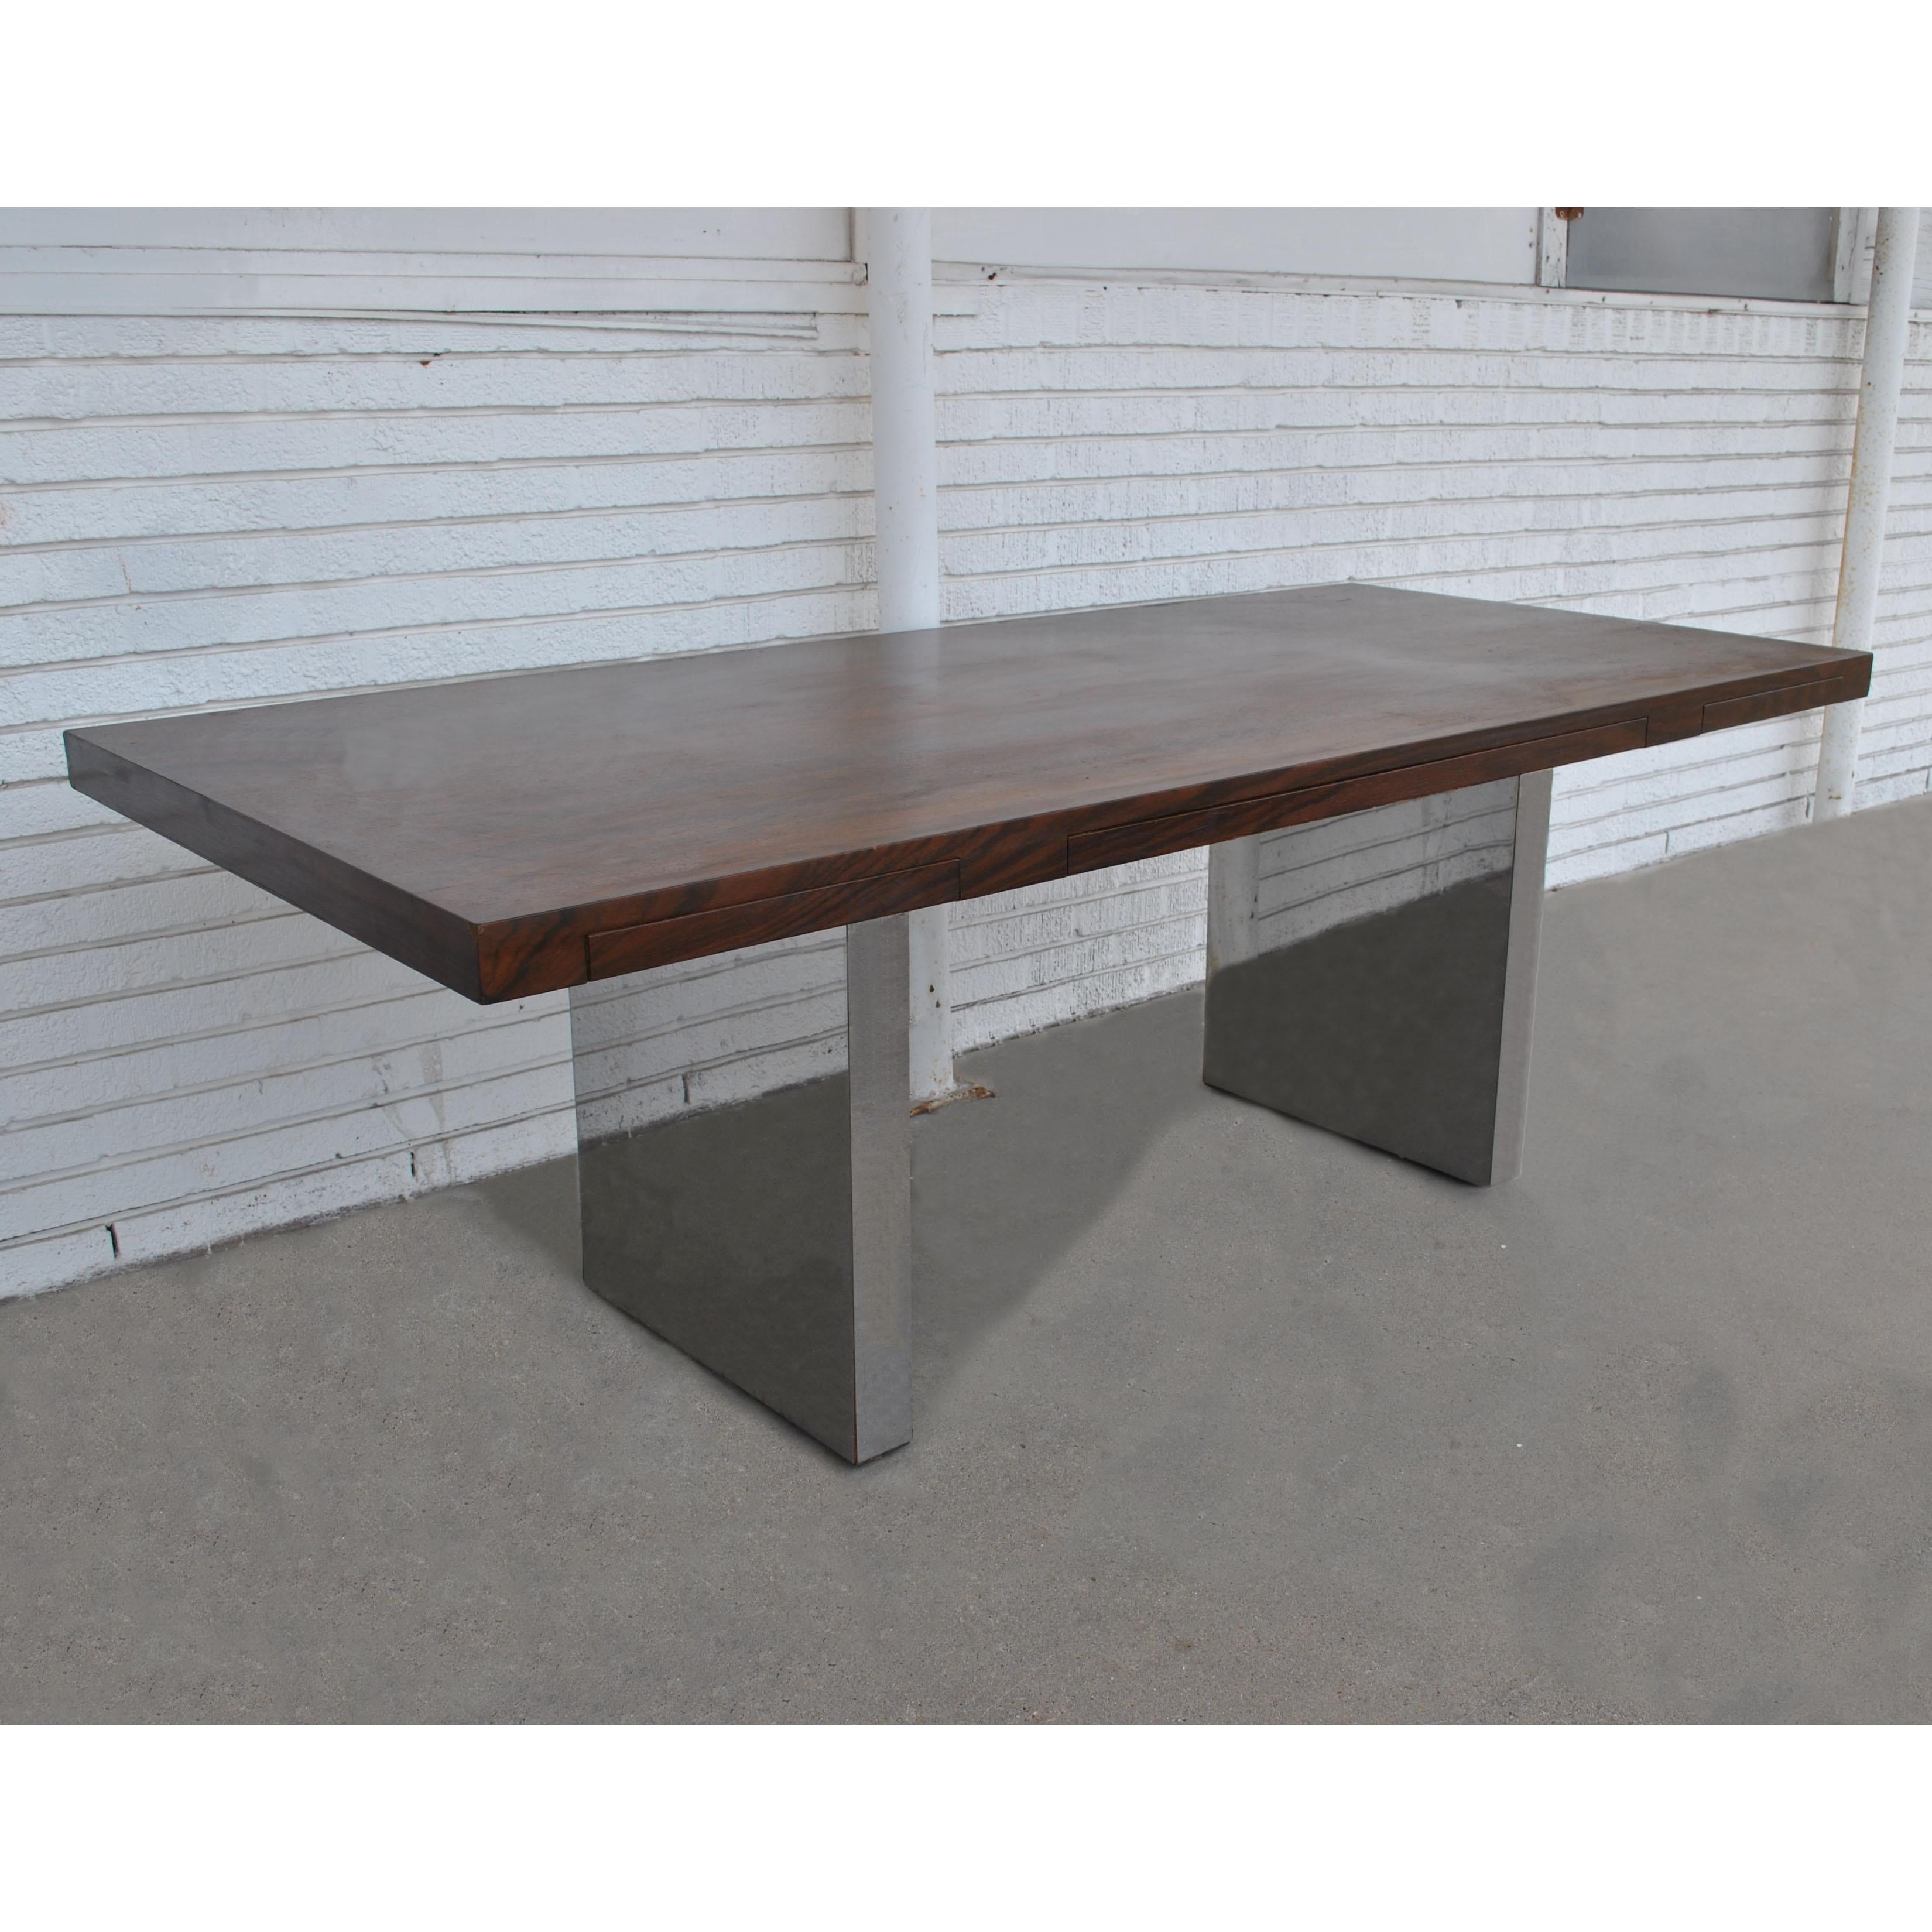 Vintage midcentury Roger Sprunger rosewood chrome table writing desk by Dunbar
1970s 

Executive desk in rich rosewood veneer with three drawers over legs in polished chrome. 
We also have a rosewood credenza available. See last photo.
